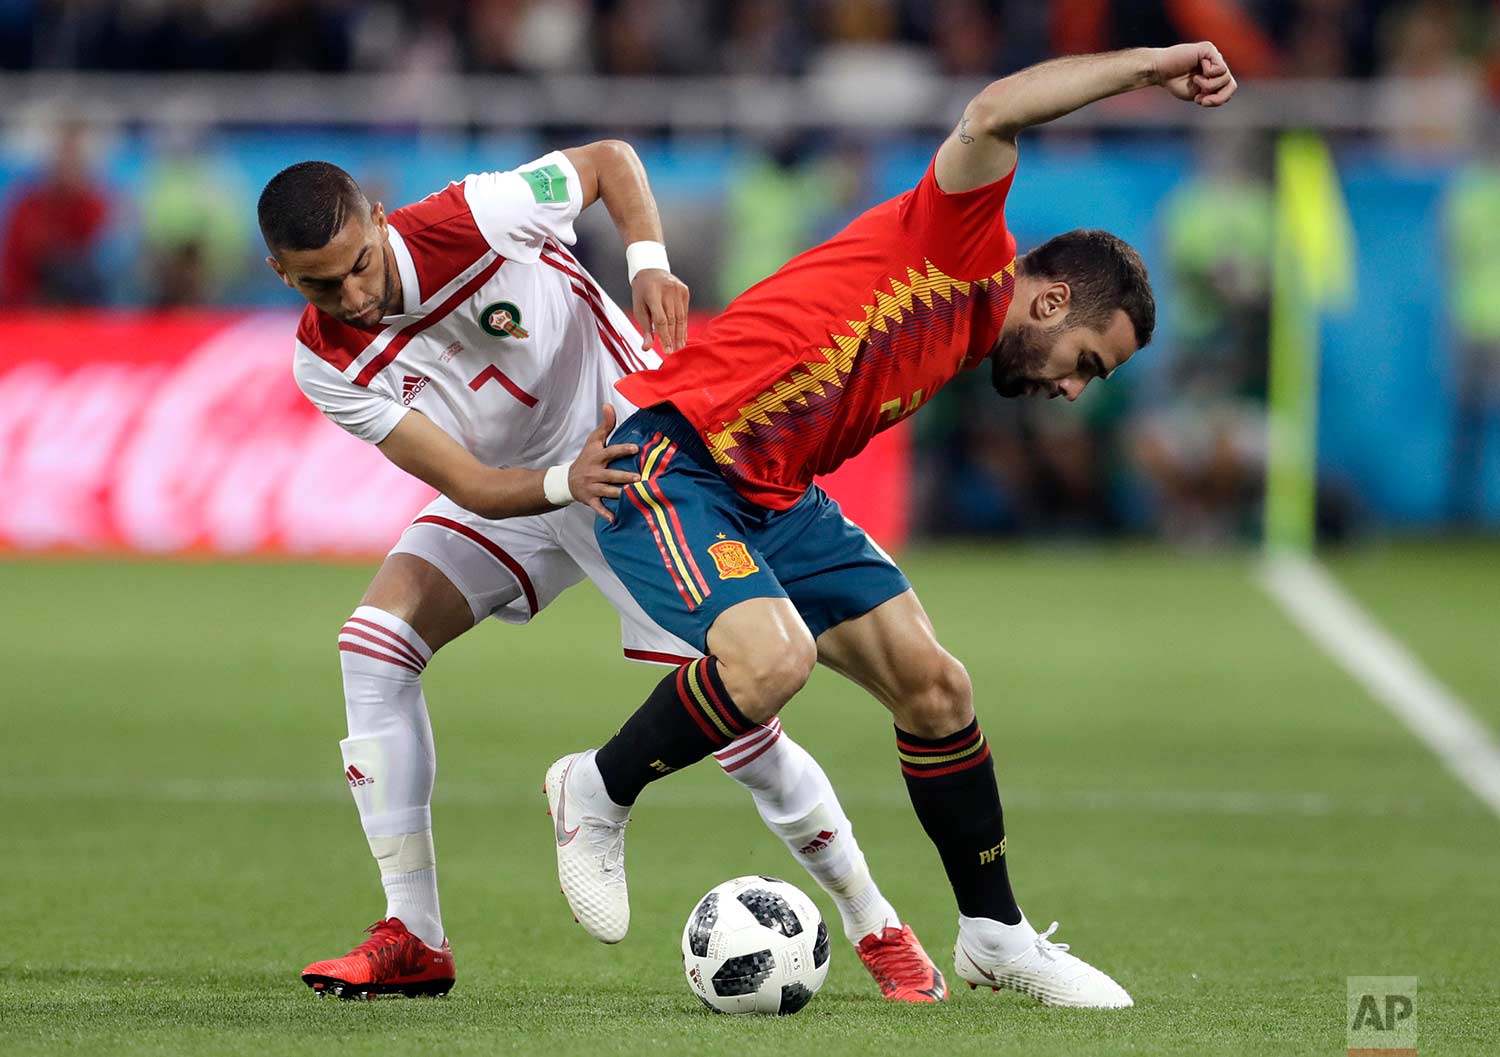  Morocco's Hakim Ziyach, left, challenges for the ball with Spain's Dani Carvajal during the group B match between Spain and Morocco at the 2018 soccer World Cup at the Kaliningrad Stadium in Kaliningrad, Russia, Monday, June 25, 2018. (AP Photo/Petr